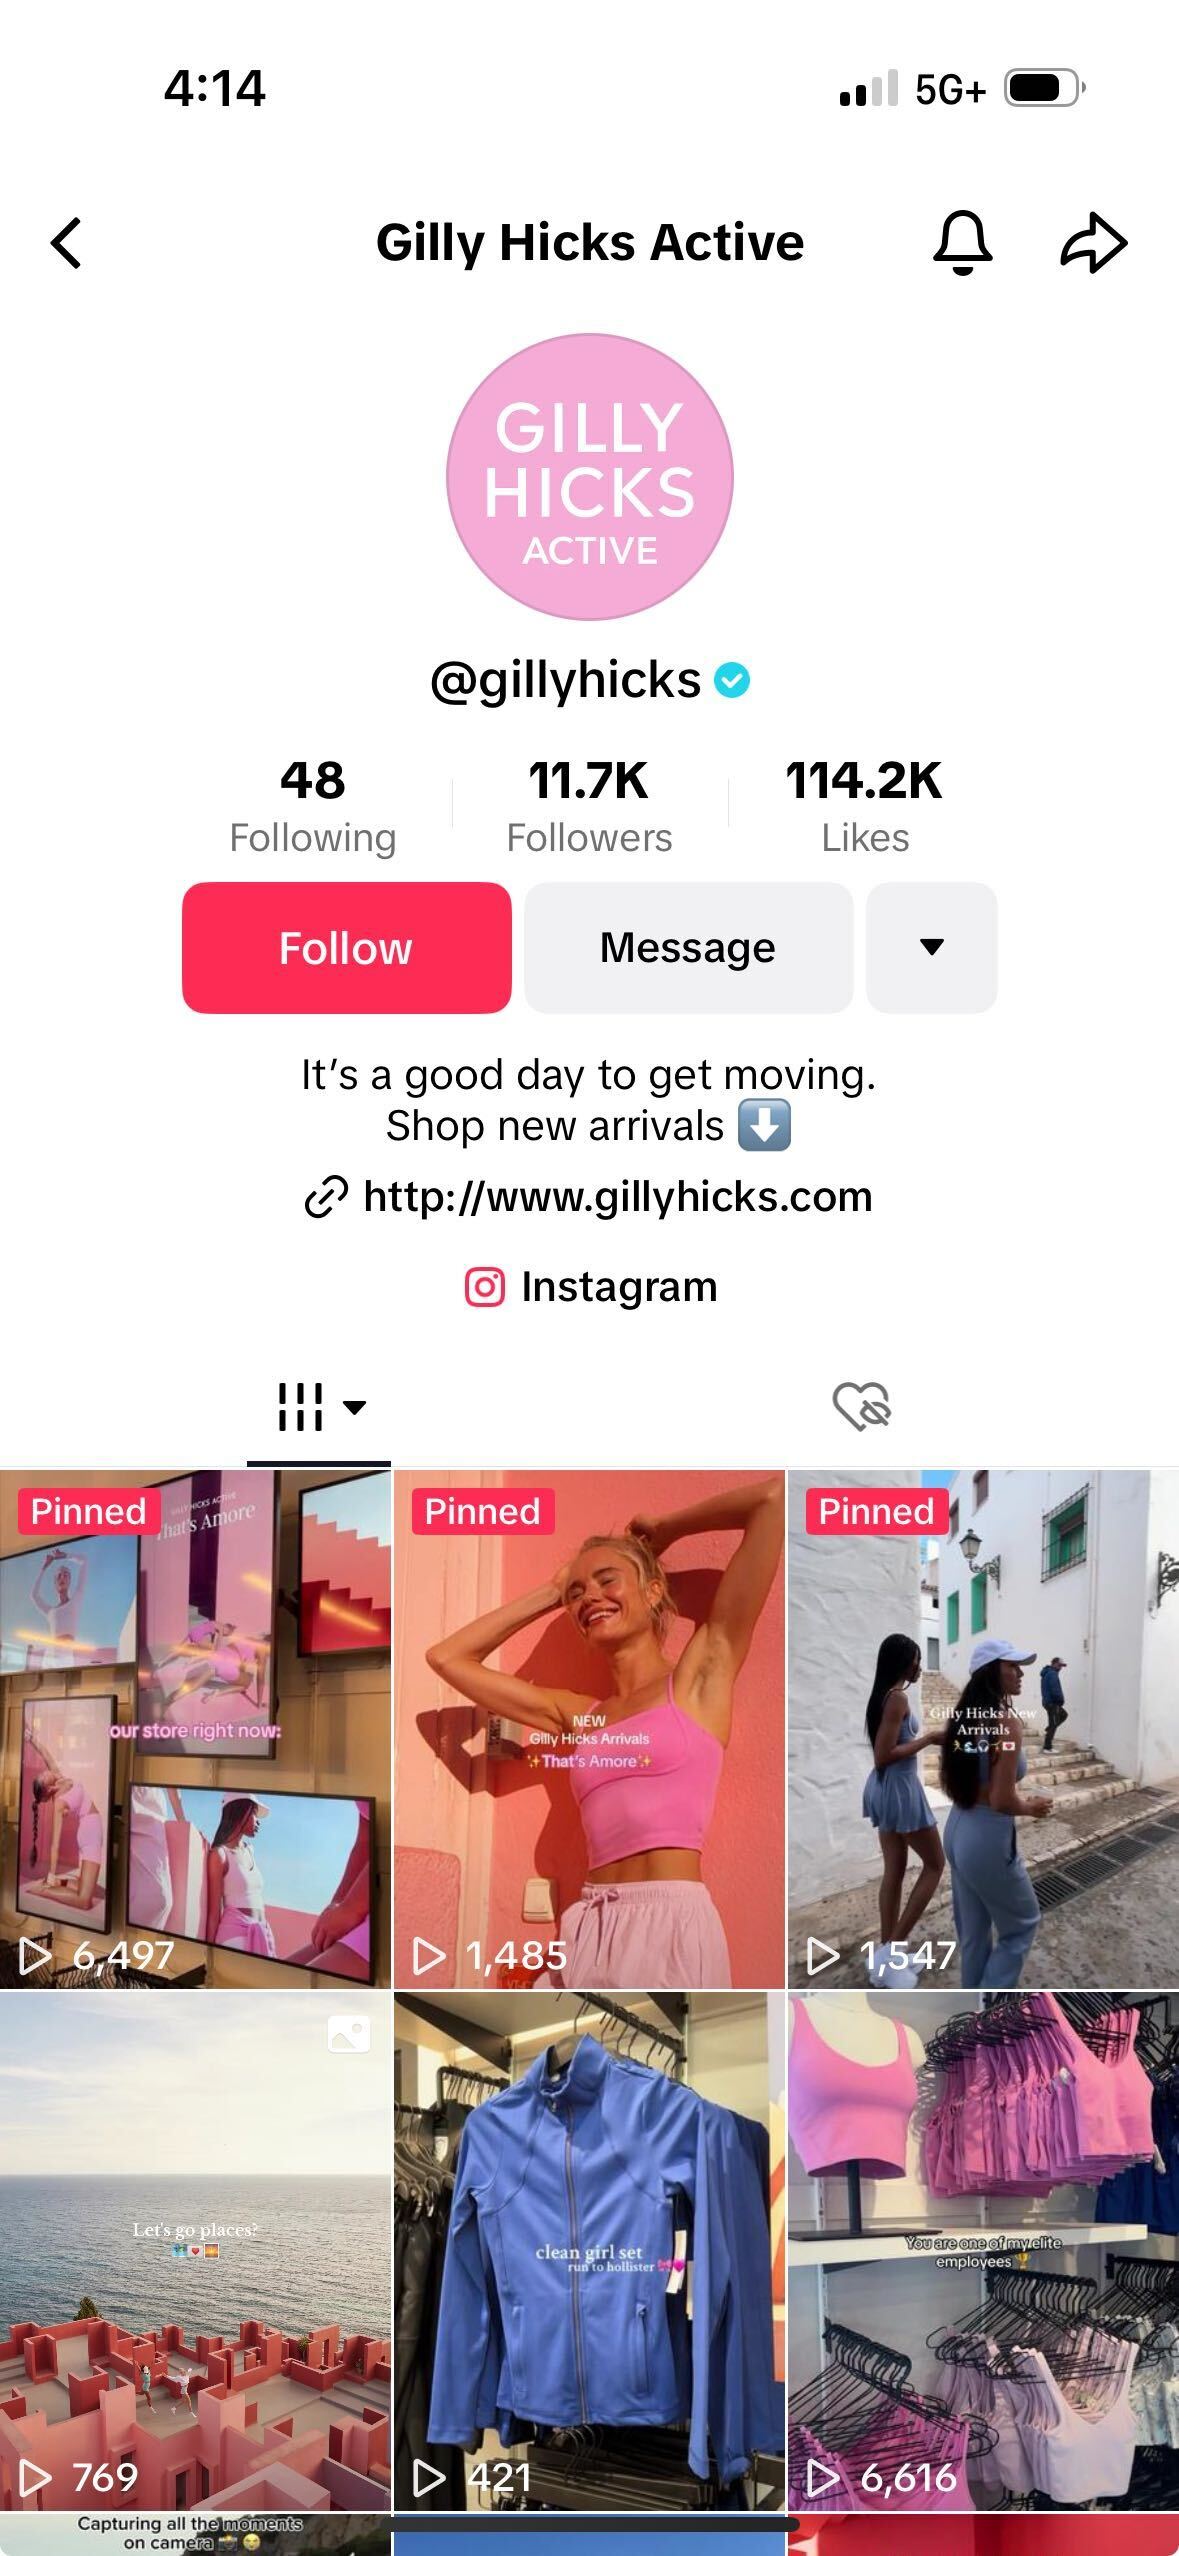 Gilly Hicks' TikTok profile. The profile picture and pinned posts are promoting the new Gilly Hicks Active line.